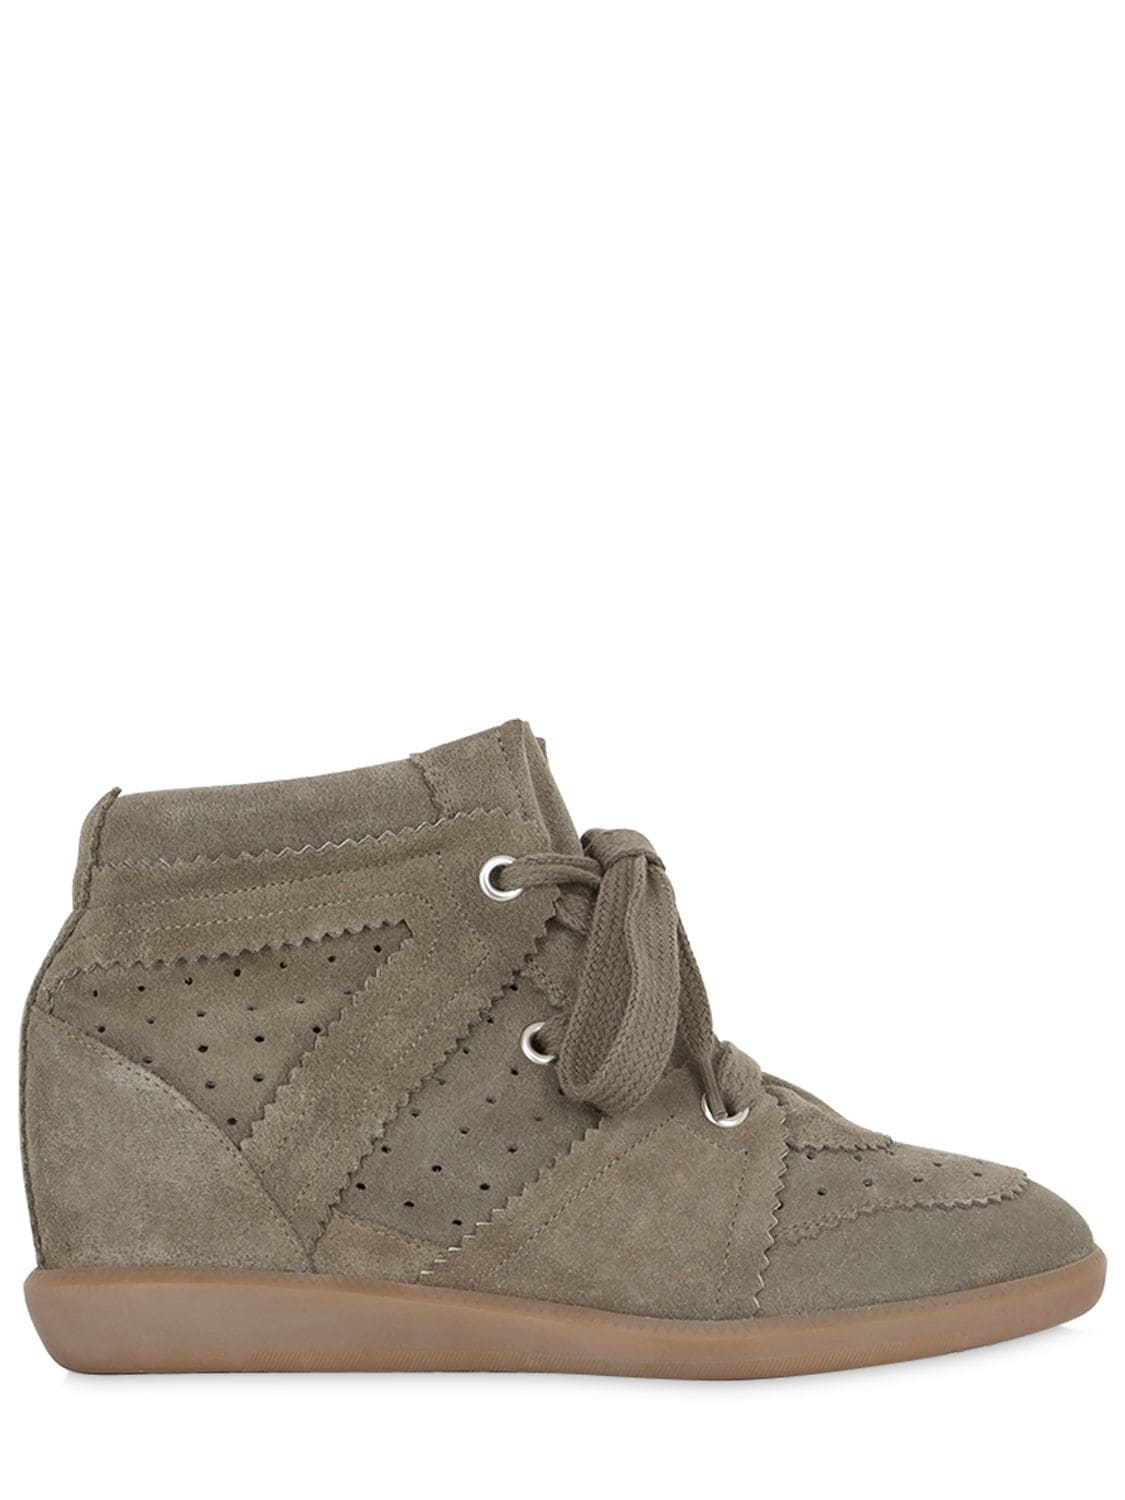 Isabel Marant 80mm Bobby Suede Wedge Sneakers In Taupe